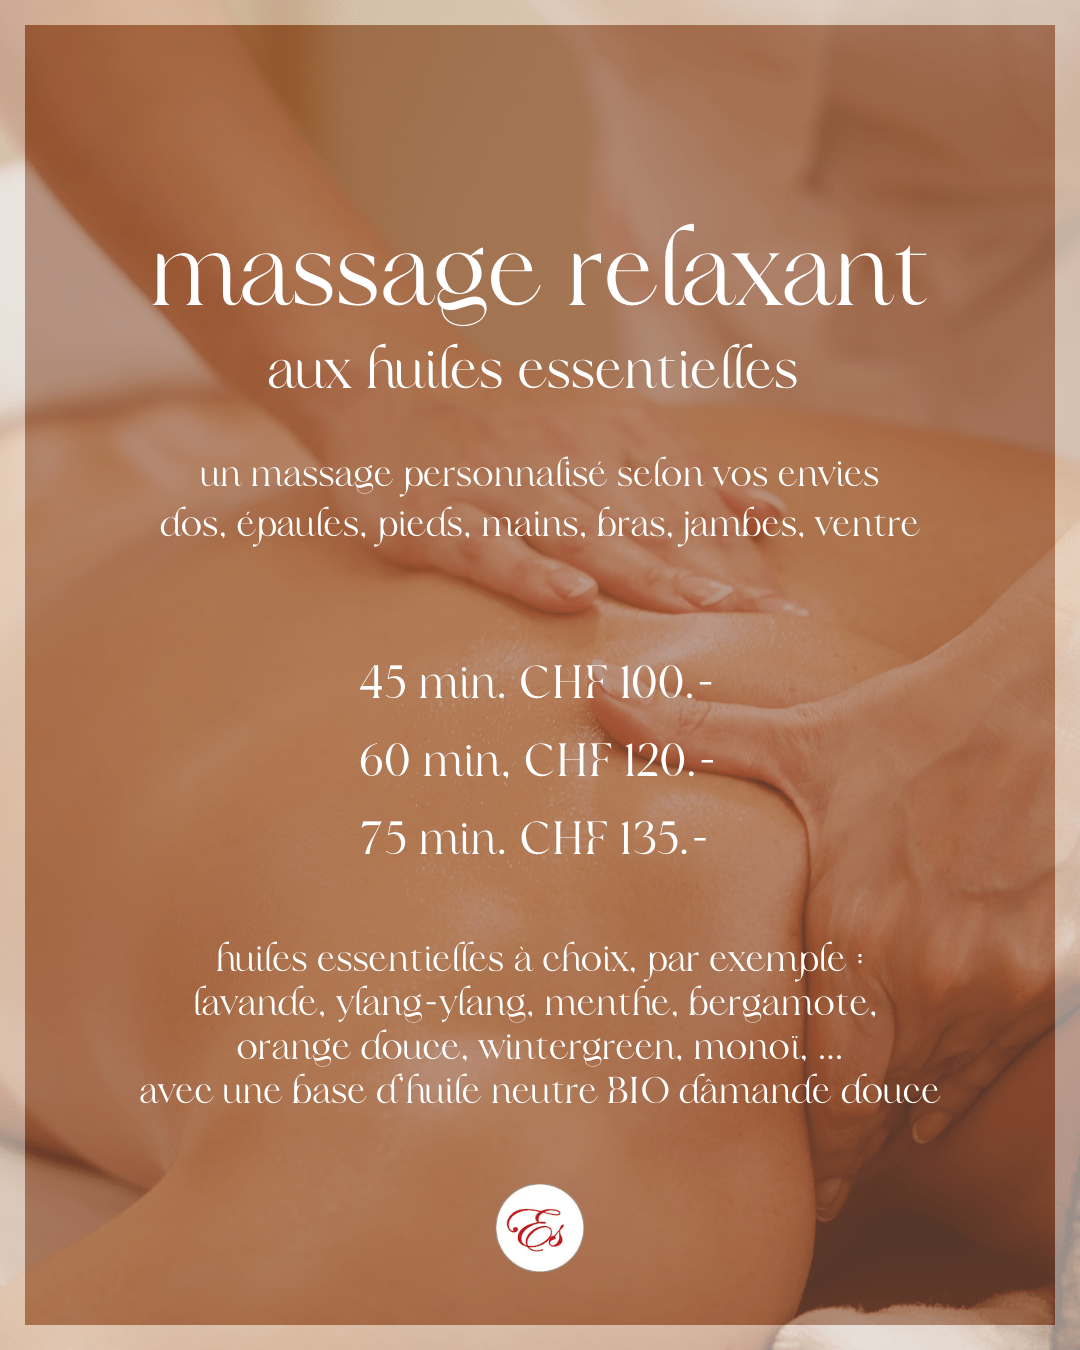 massage vevey esthéticienne relaxation relaxant antistress